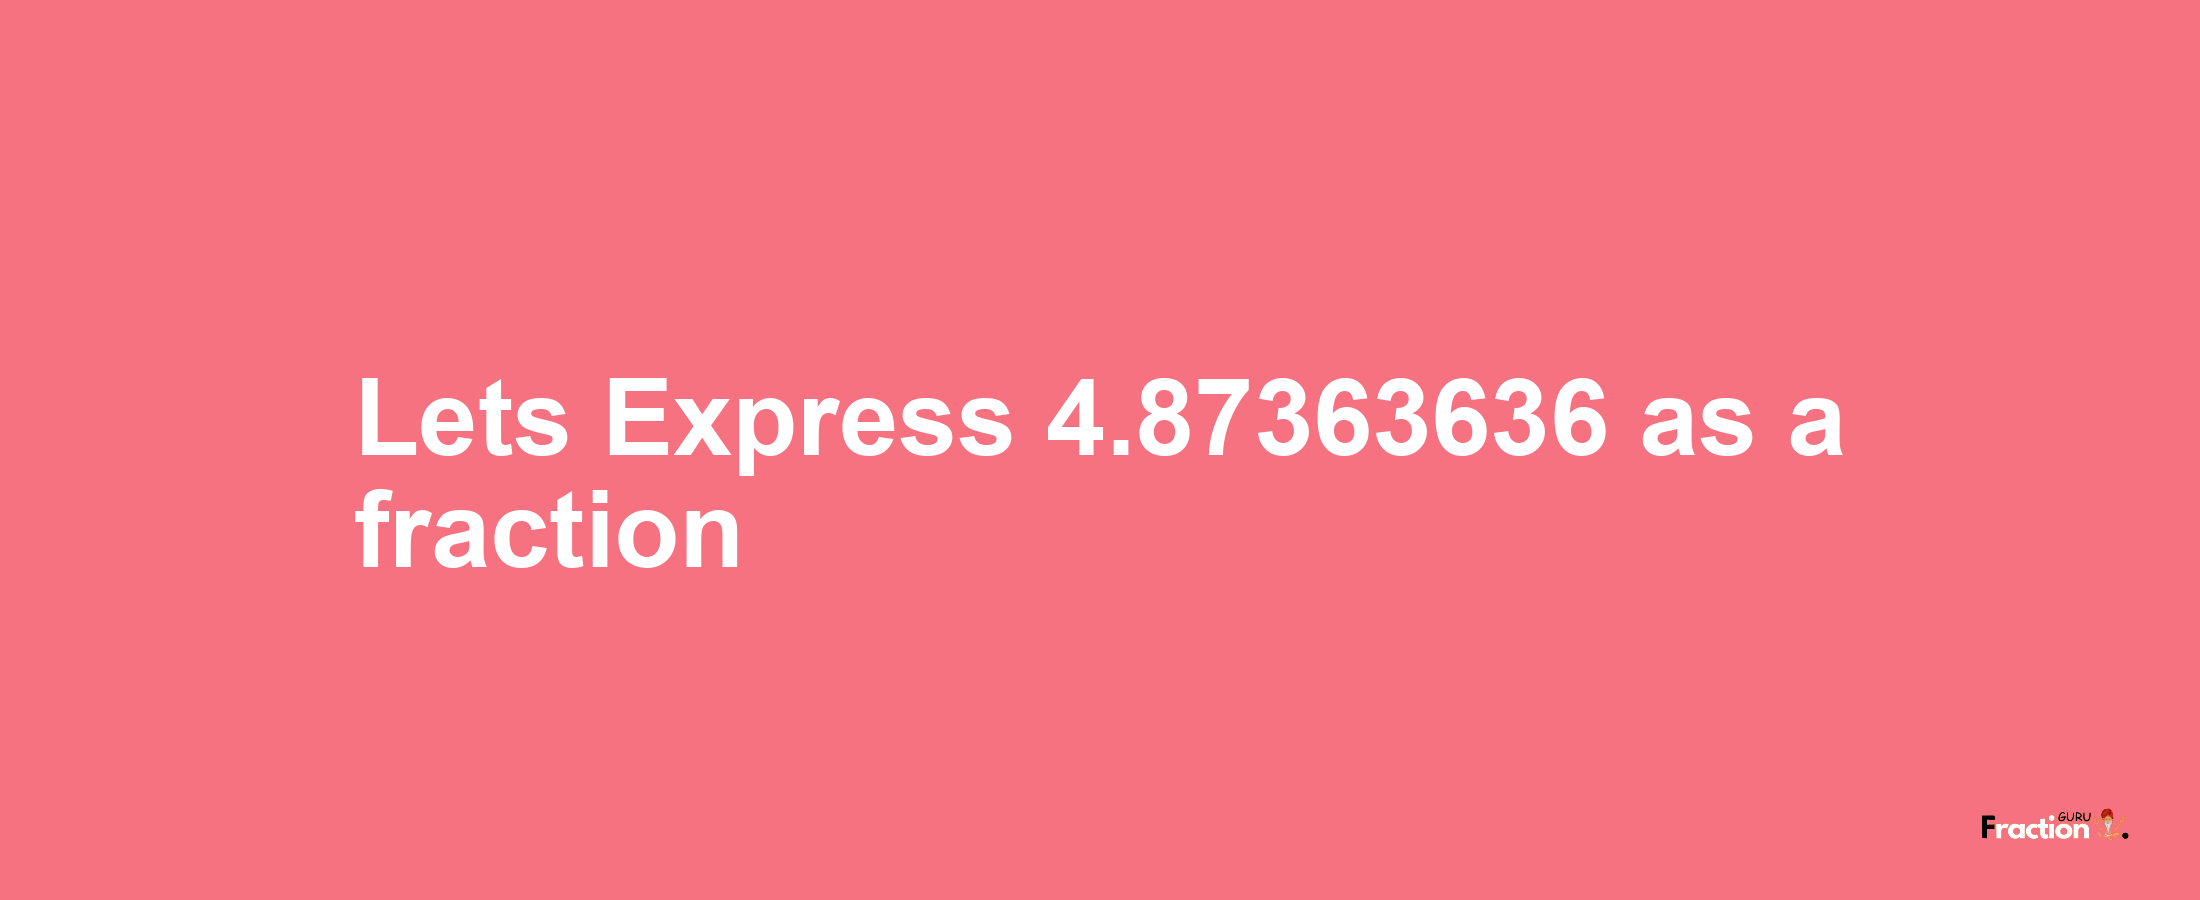 Lets Express 4.87363636 as afraction